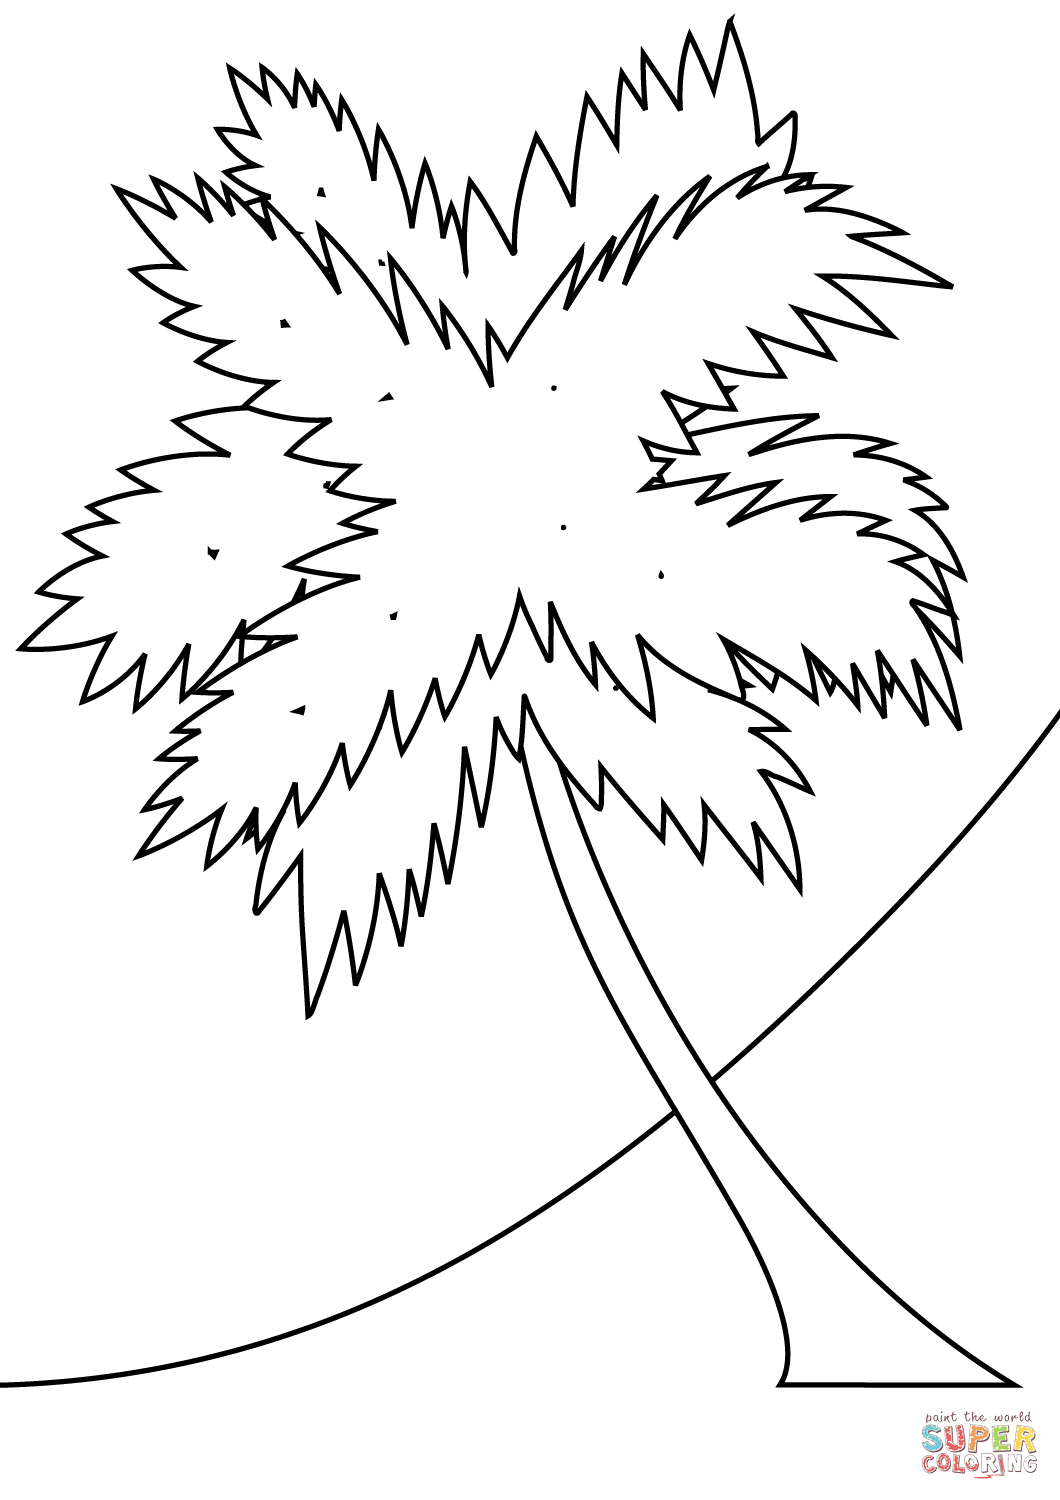 Palm Tree On A Beach Coloring Page | Free Printable Coloring Pages - Tree Coloring Pages Free Printable